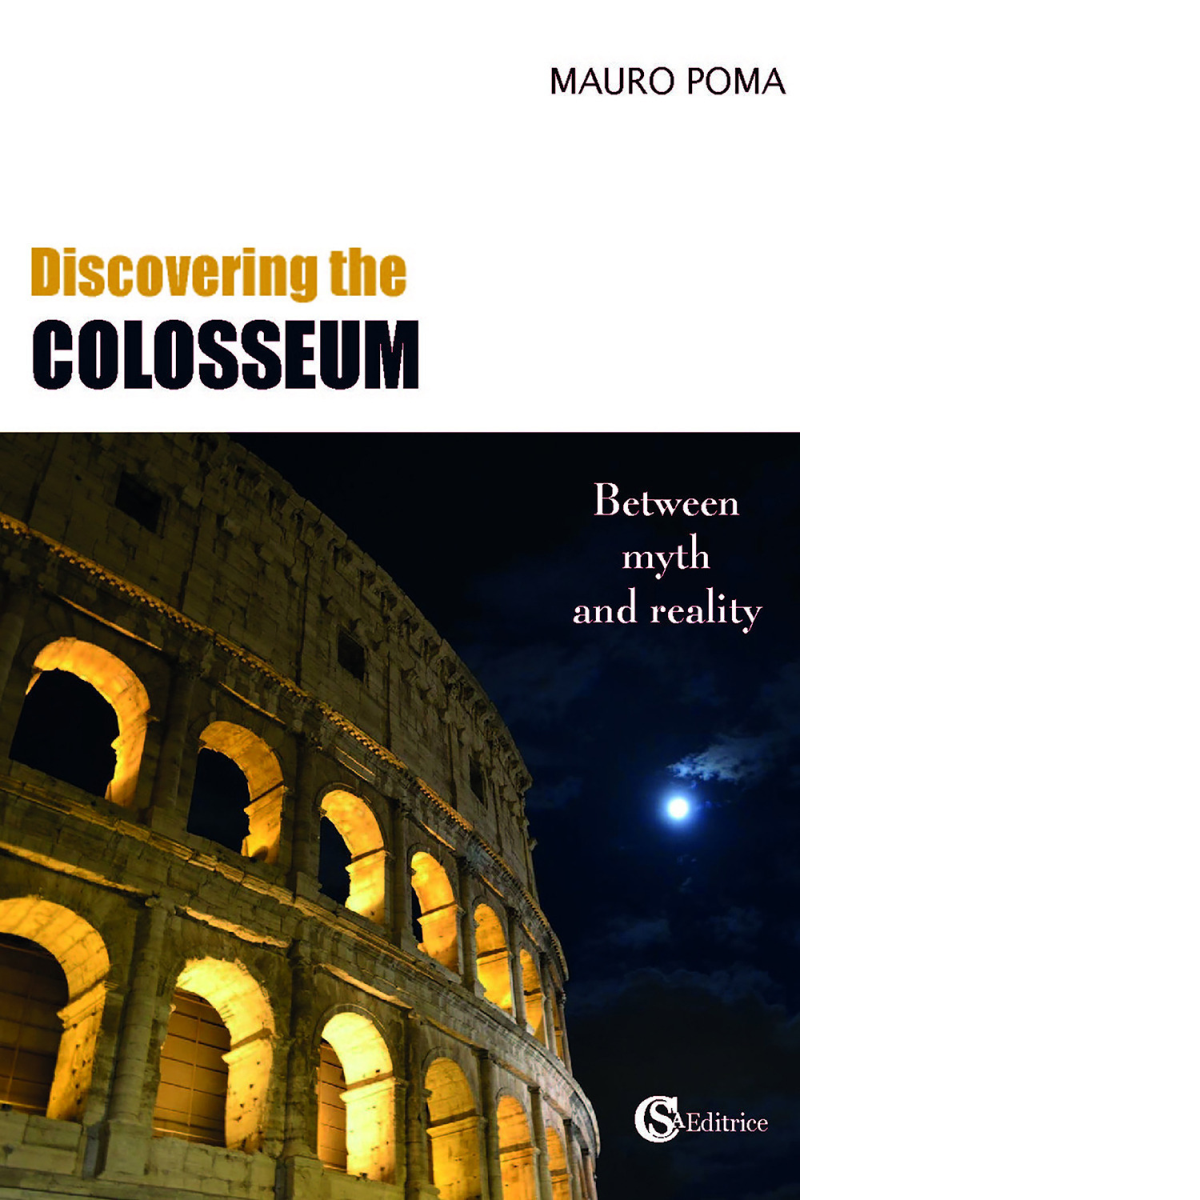 Discovering the Colosseum. Between myth and reality di Mauro Poma - 2021 libro usato